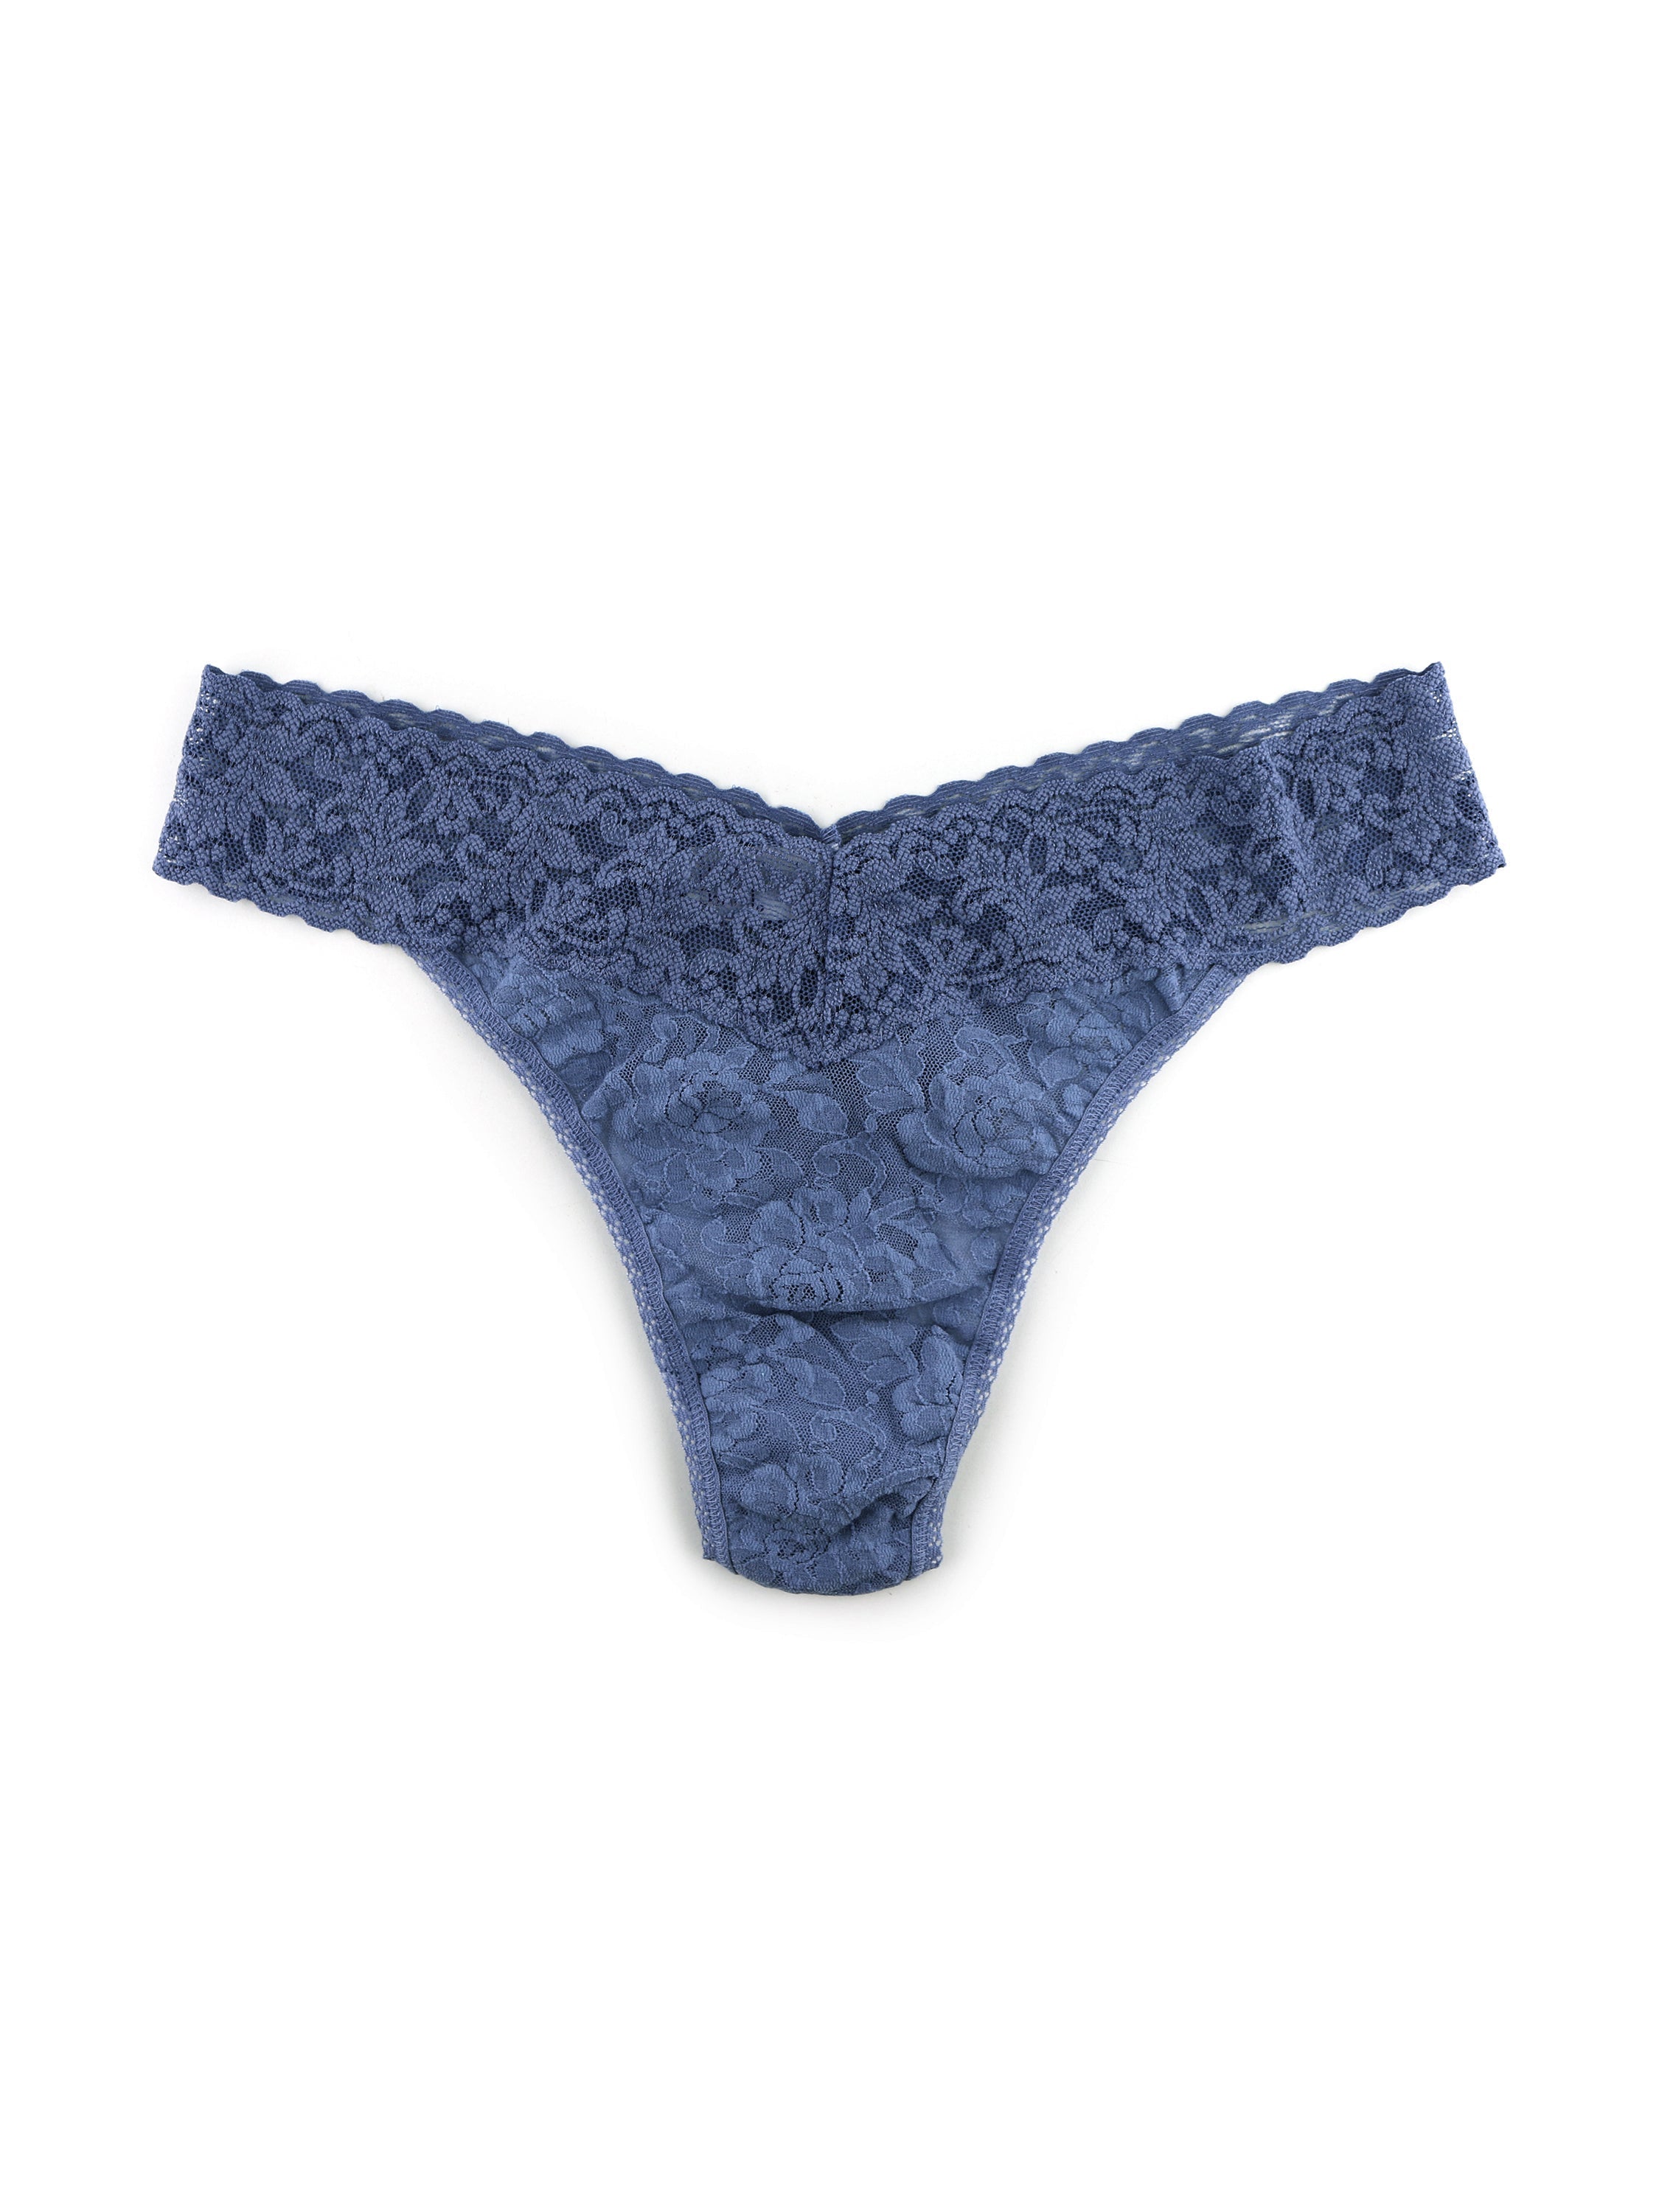 Hanky Panky Women's Signature Lace Original Rise Thong Nightshadow Blue - Blue, One Size